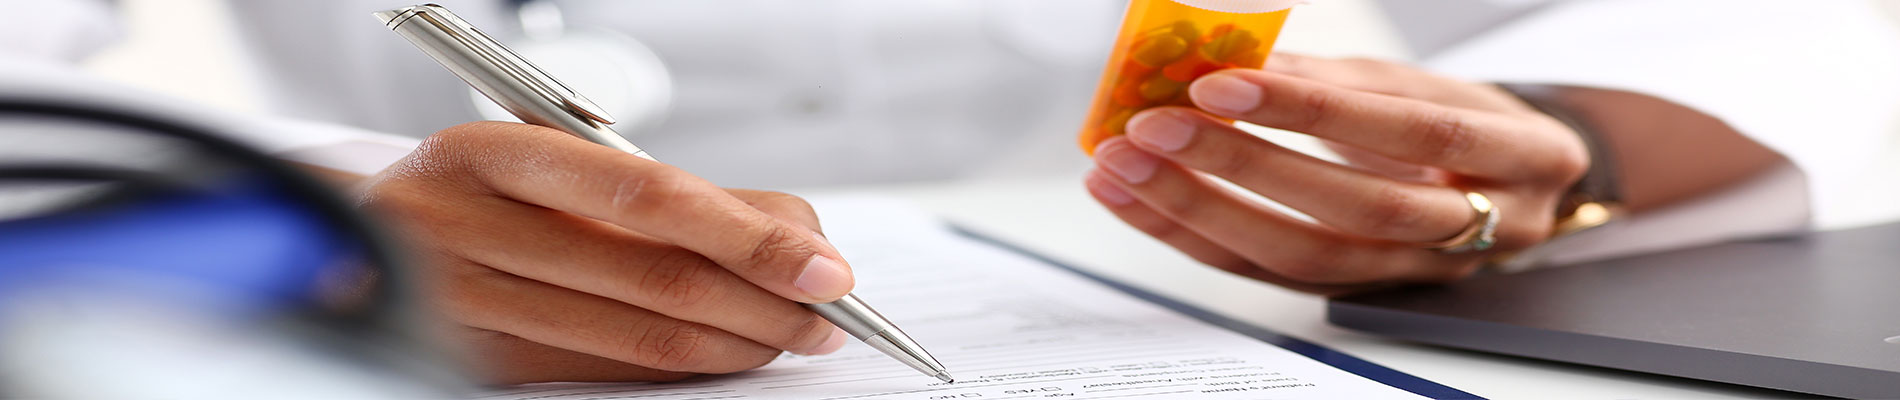 Physician holding a pill bottle while writing out a prescription refill